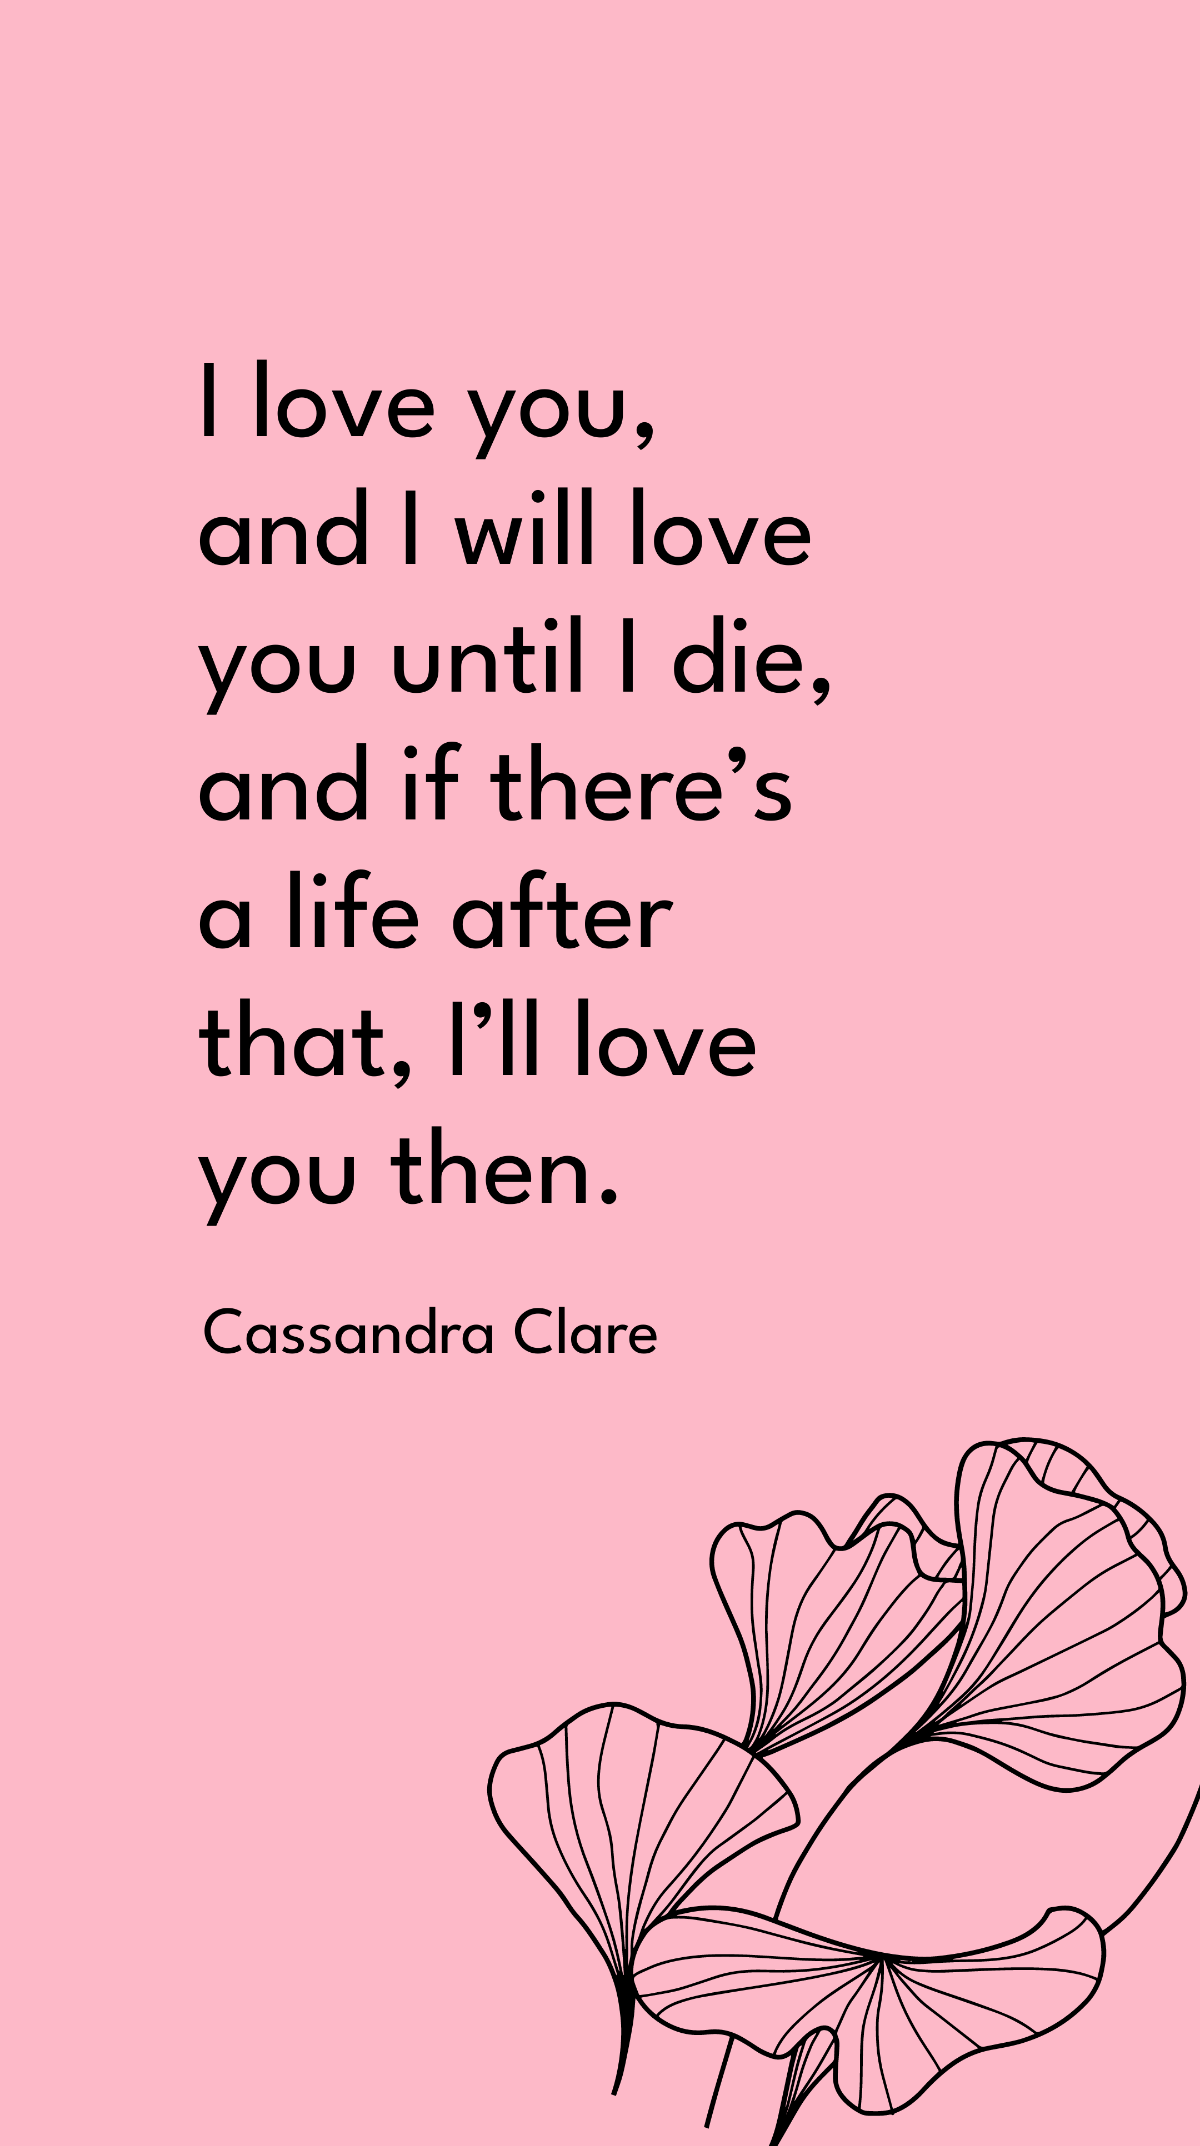 Free Cassandra Clare - I love you, and I will love you until I die, and if there’s a life after that, I’ll love you then. Template